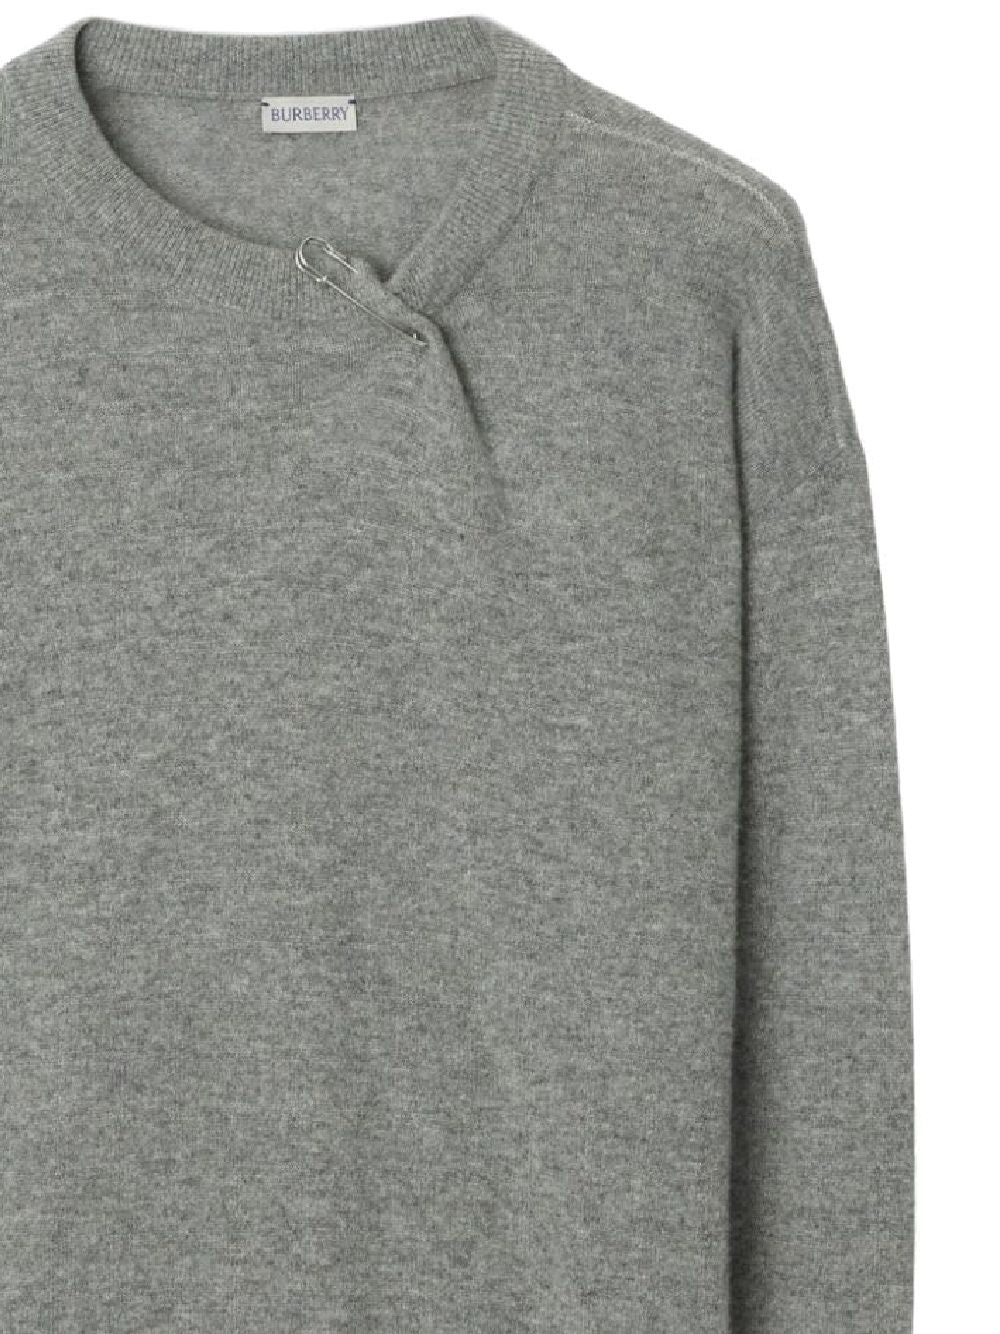 Gray sweater with logo embroidered on the front